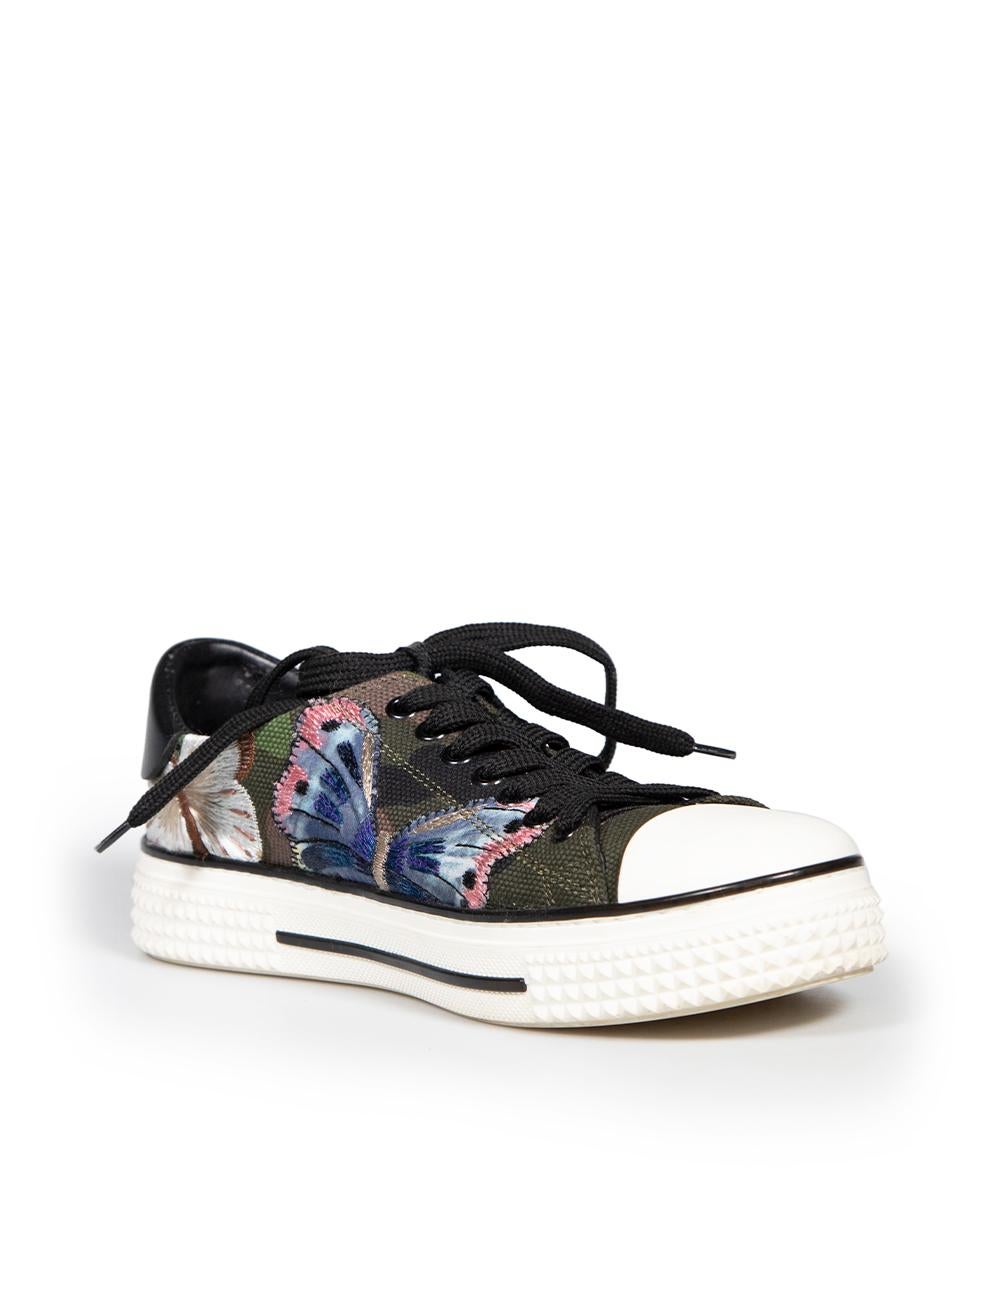 CONDITION is Very good. Minimal wear to shoes is evident. Minimal wear to both shoe rubber outsoles with marks on this used Valentino designer resale item.
 
 
 
 Details
 
 
 Green
 
 Cloth textile
 
 Trainers
 
 Camouflage pattern
 
 Embroidered